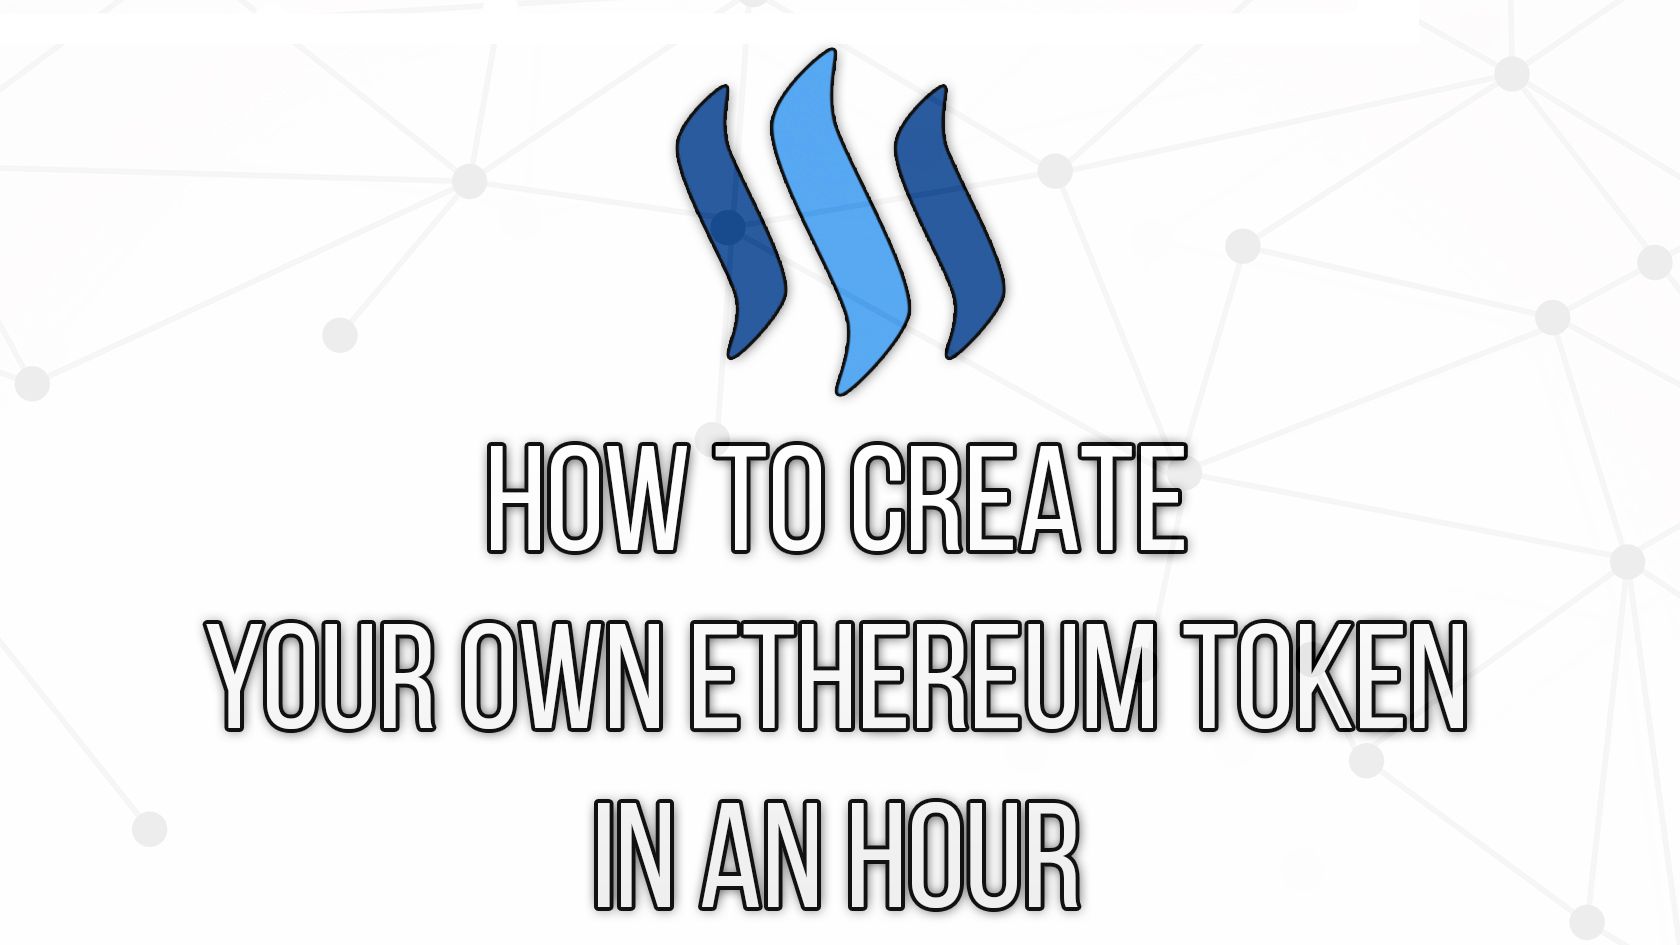 How To Create Your Own Ethereum Token In An Hour (ERC20 + Verified) — Steemit